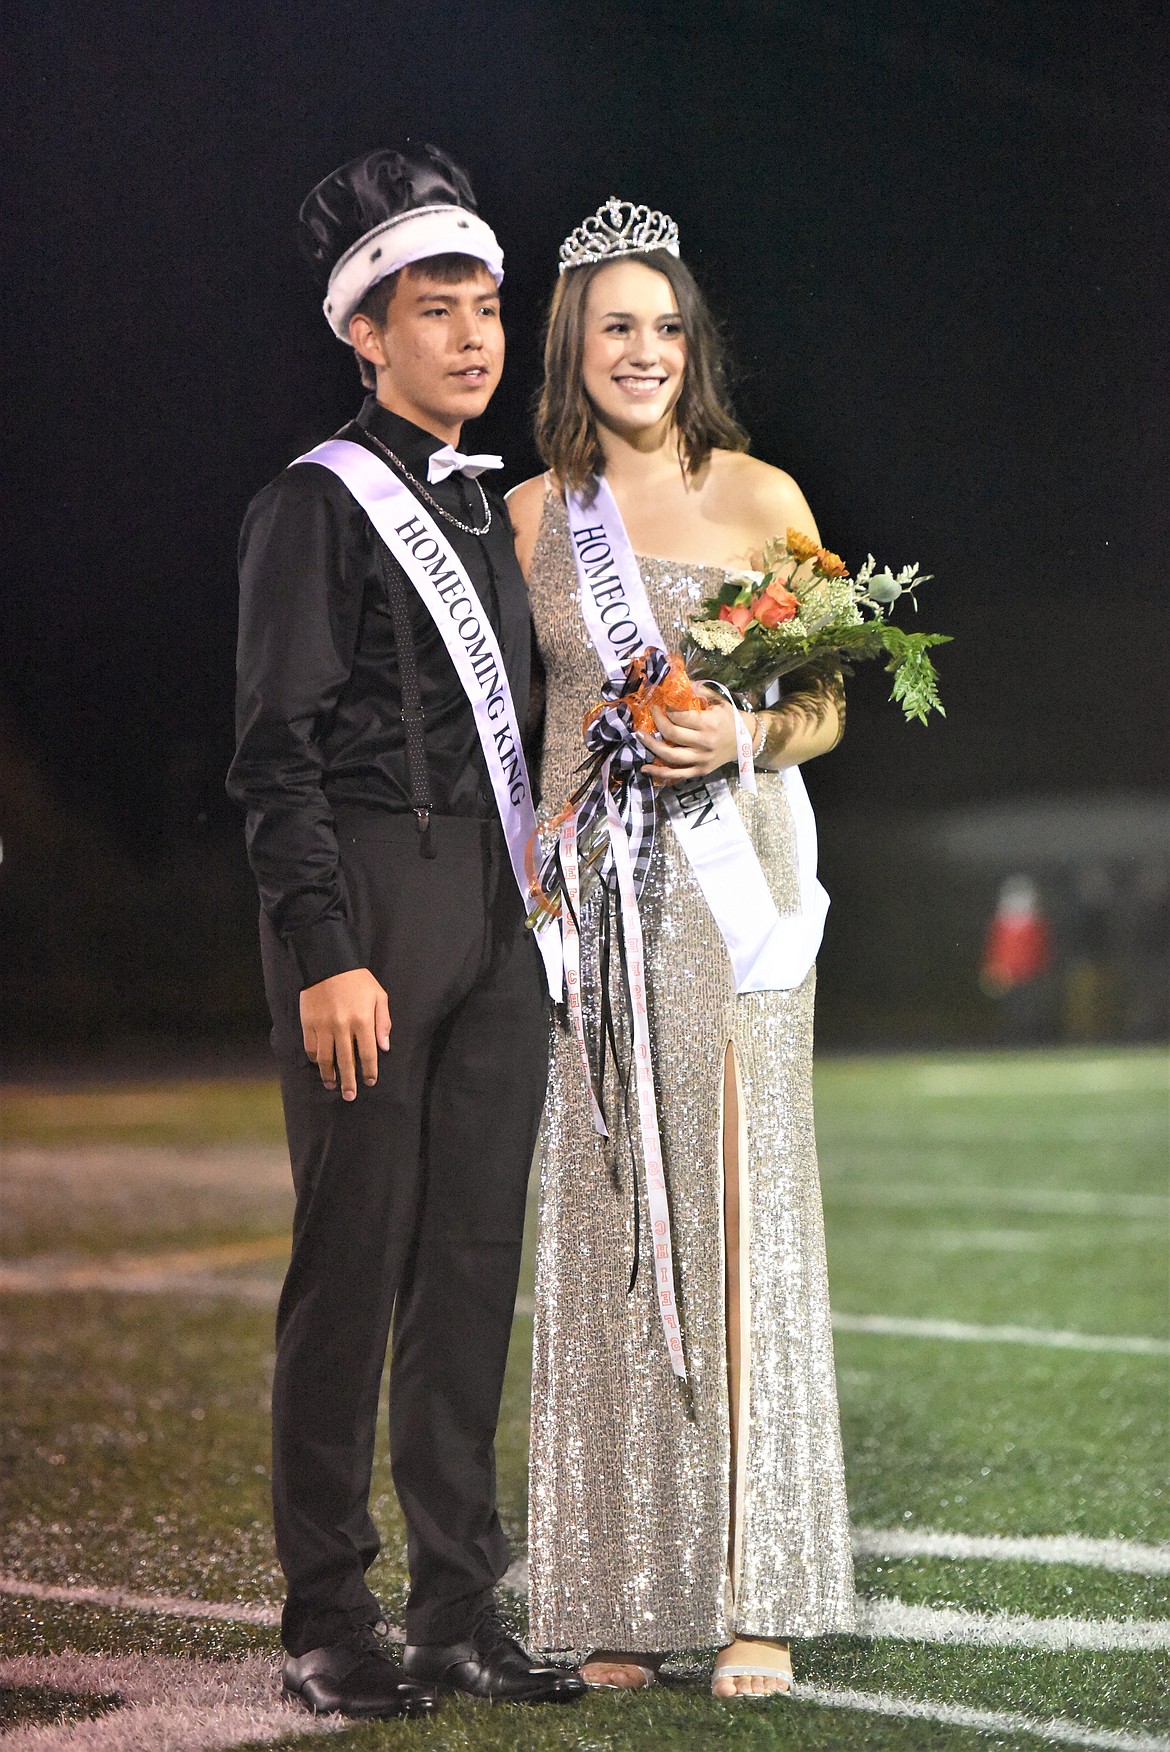 Ronan High School Homecoming king and queen Leonard Burke and Madeline McCrea. Other members of the court were: Zarec Couture, Girma Detwiler, Daniel Kelsch, Macao Jackson, Kiana King and Jaylea Lunceford. (Scot Heisel/Lake County Leader)